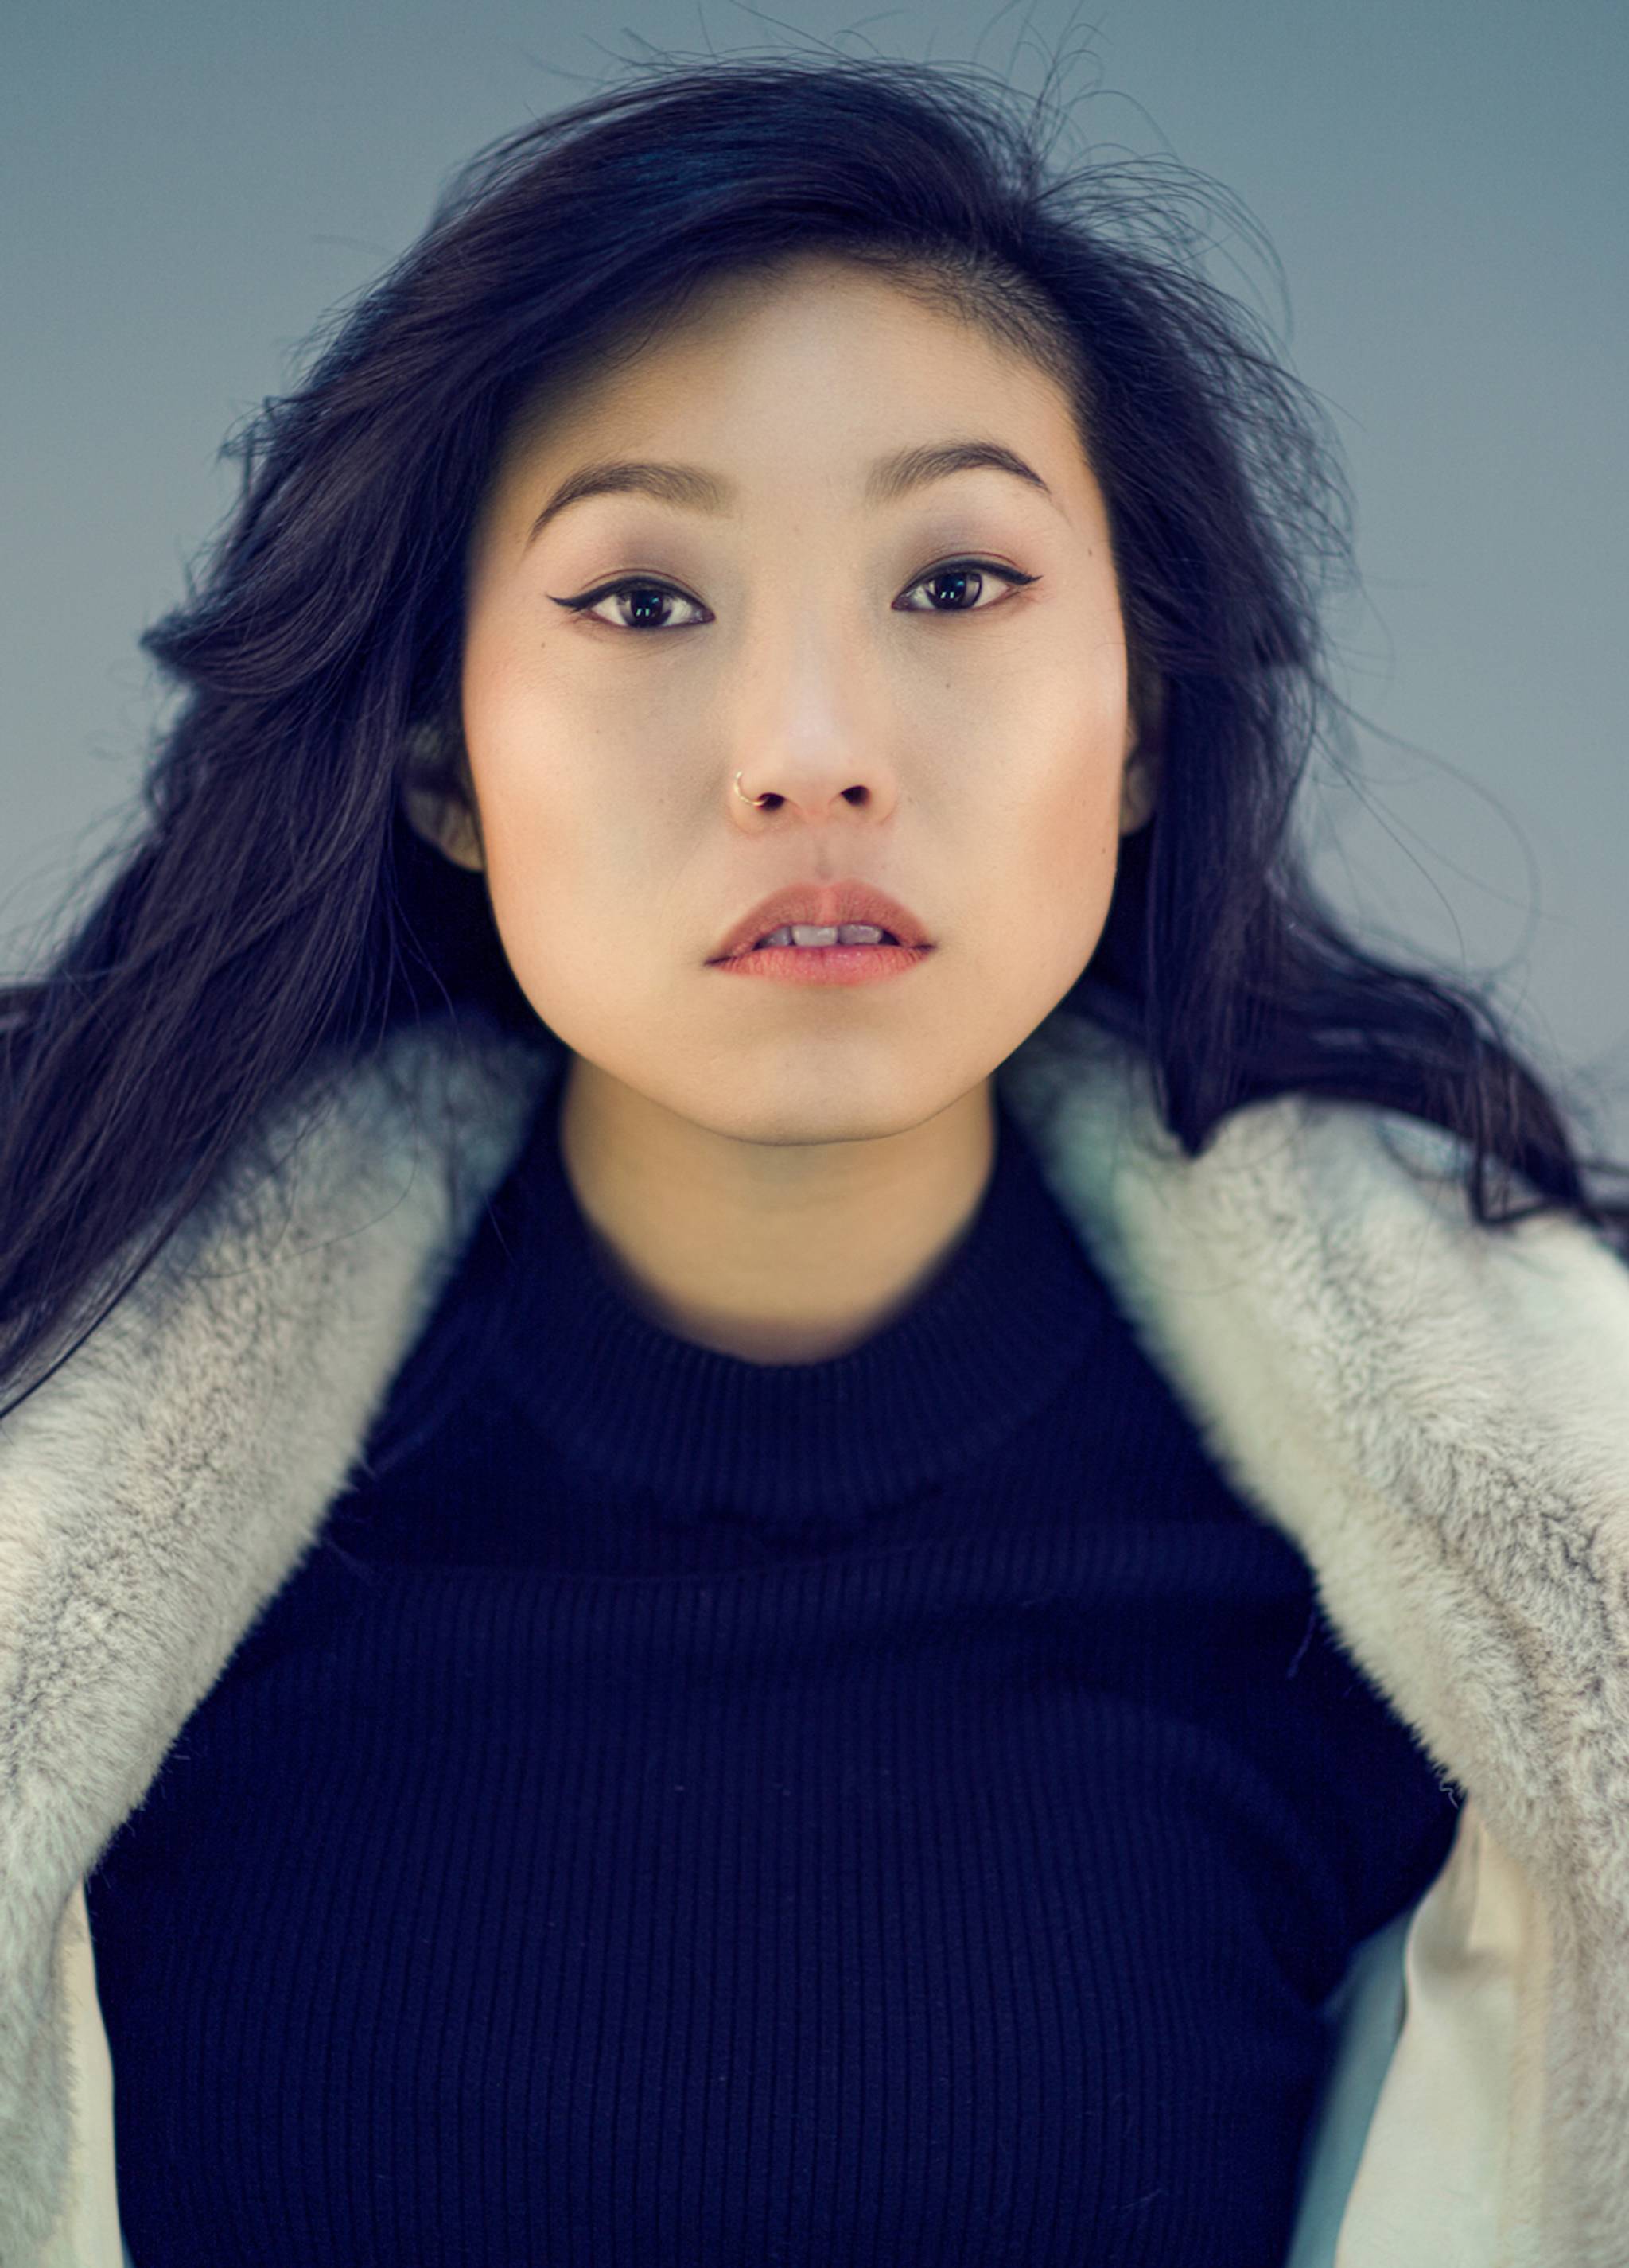 Awkwafina brightens up dull subway rides with comedy